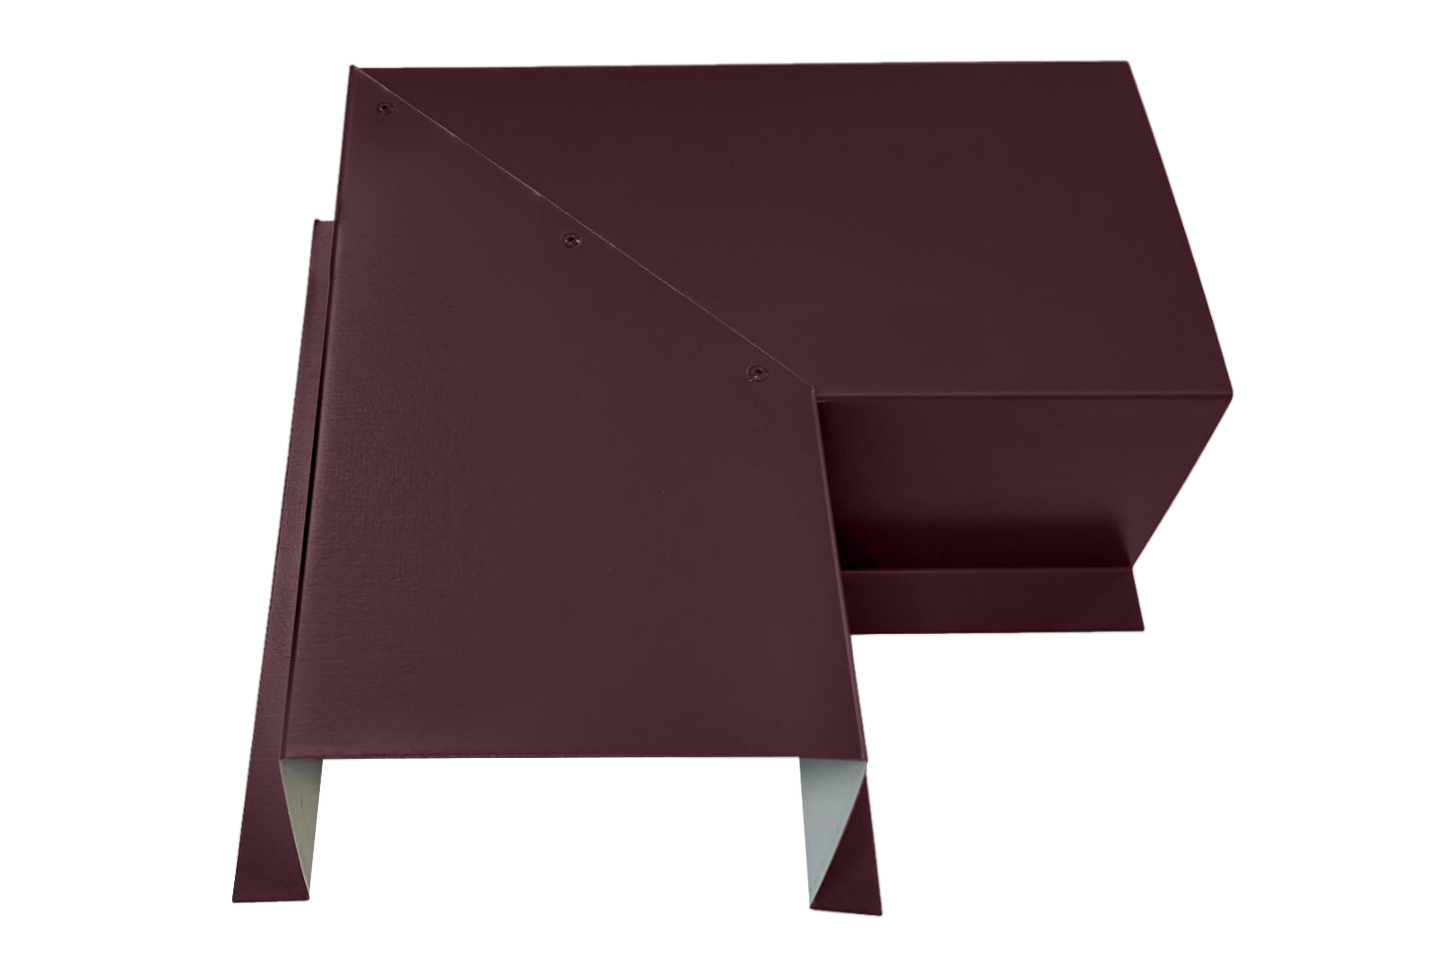 A Perma Cover Commercial Series - 24 Gauge Line Set Cover Side Turning Elbows - Premium Quality, maroon-colored, angular metal object with clean lines and sharp edges, featuring a folded and overlapping geometric design. Made from premium quality 24 gauge steel, the structure has an L-shaped profile with multiple flat surfaces and pointed ends.